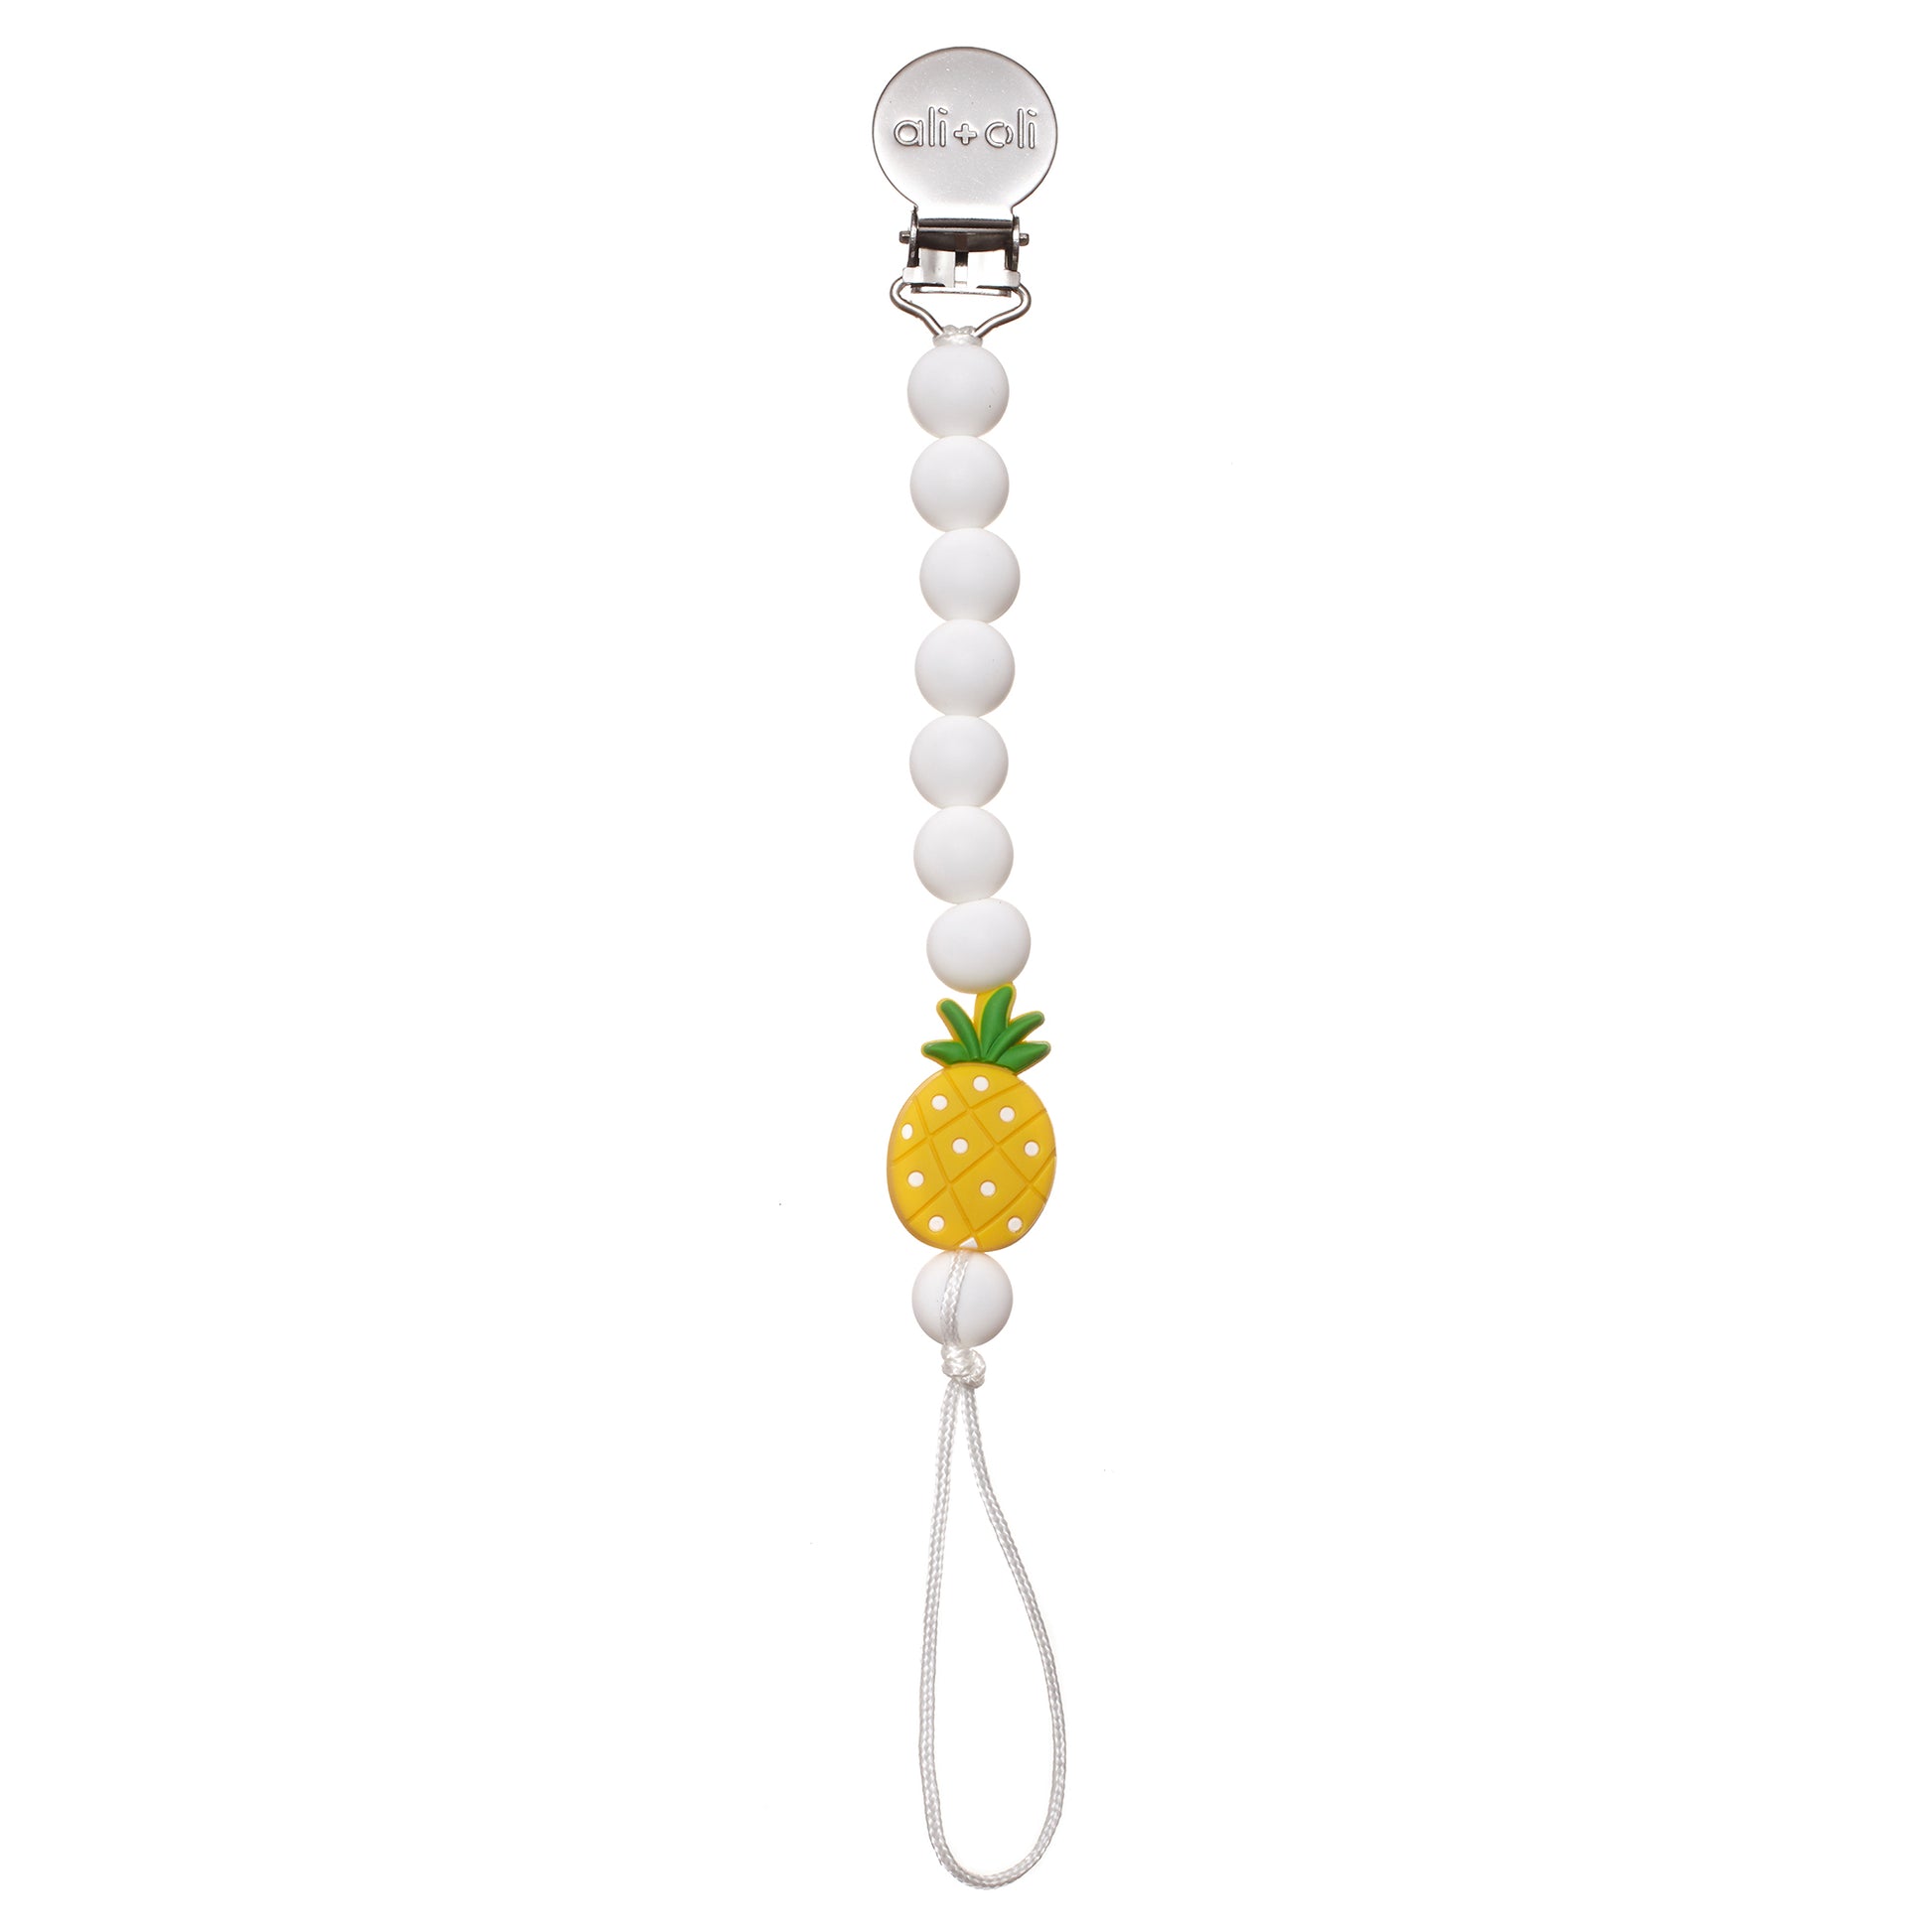 Ali+Oli pacifier clip pineapple with silicone beads in white